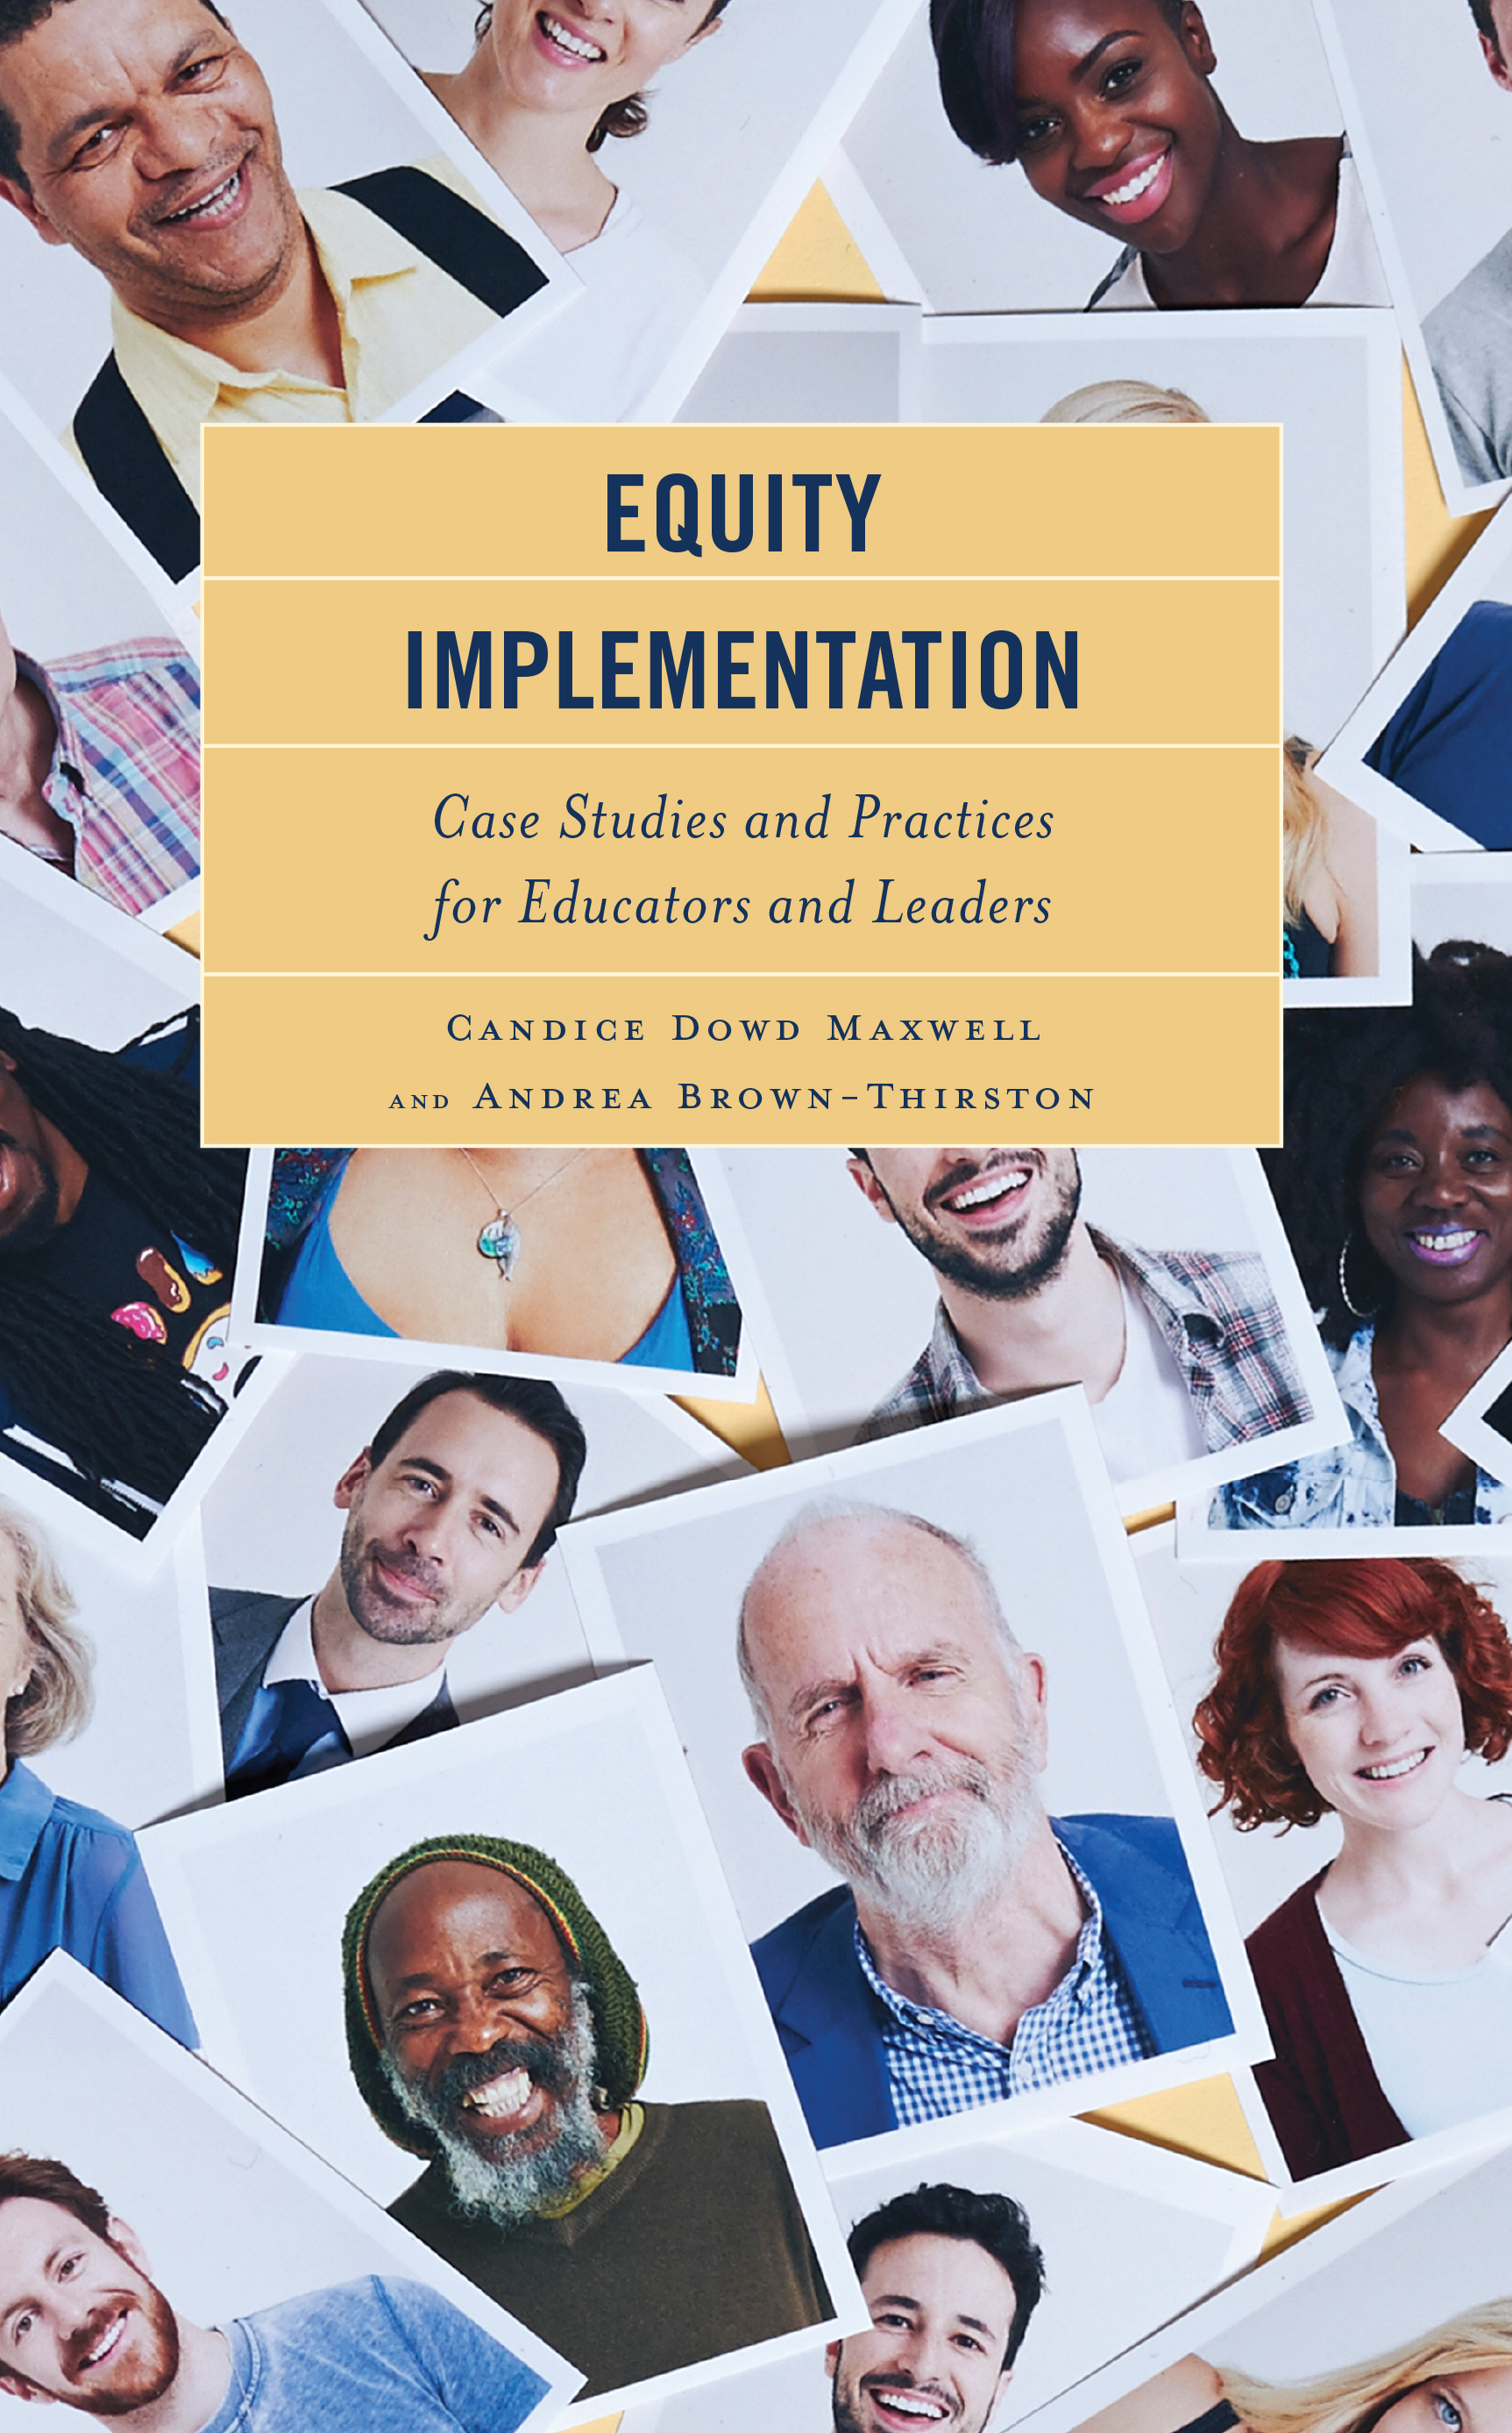 Equity Implementation: Case Studies and Practices for Educators and Leaders